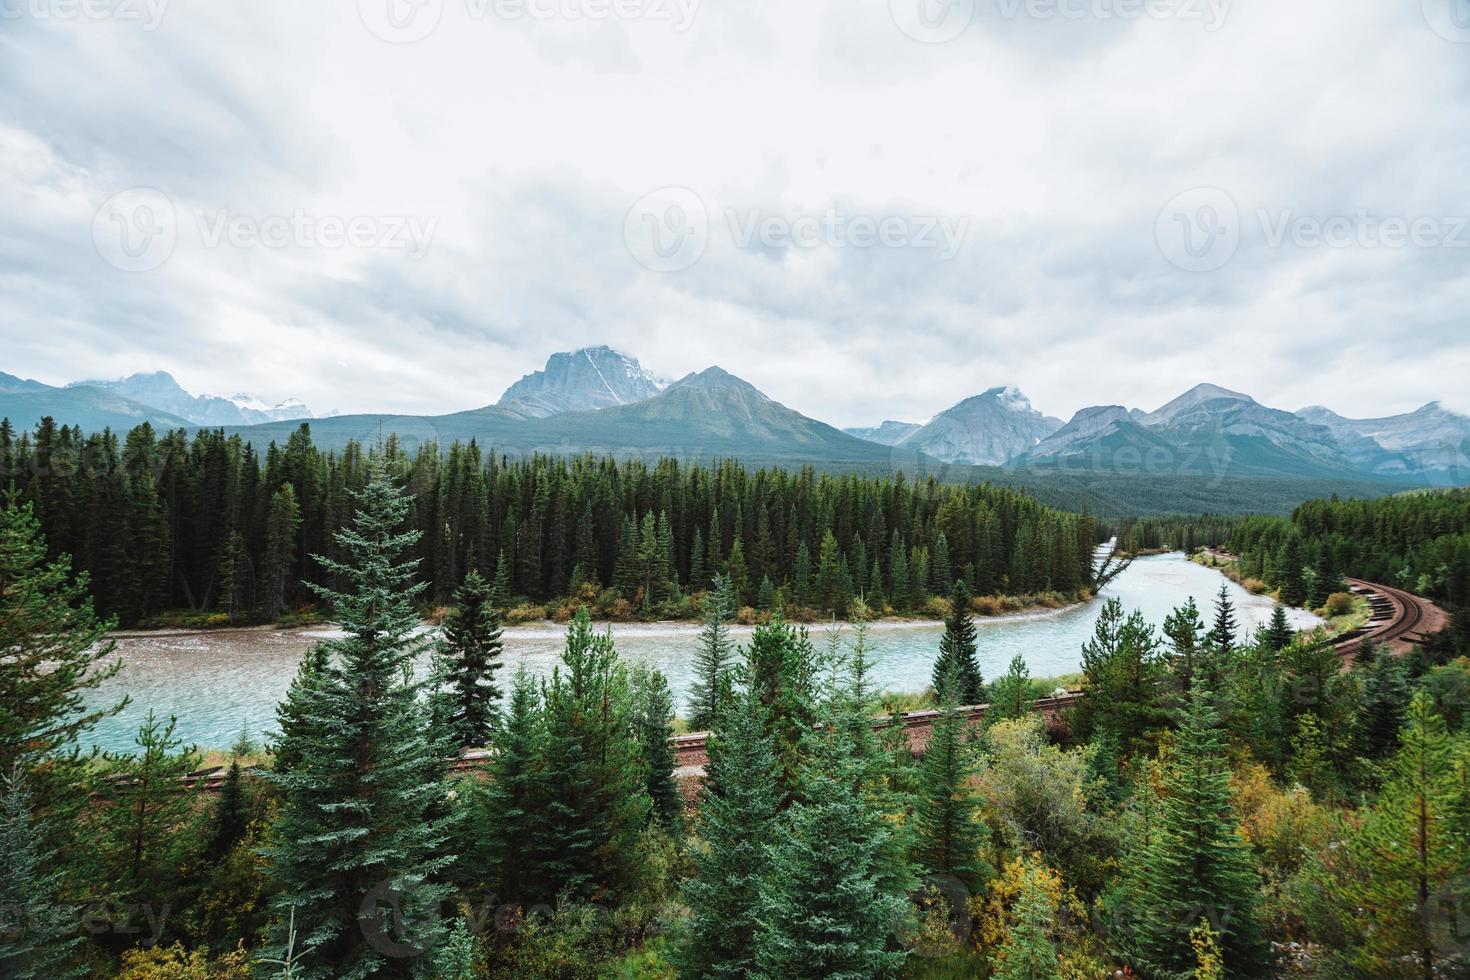 Morant's Curve, Bow River flows through forest and railway track. Storm Mountain in the background. Castle Cliff Viewpoint, Bow Valley Parkway, Banff National Park, Canadian Rockies, Alberta, Canada. photo